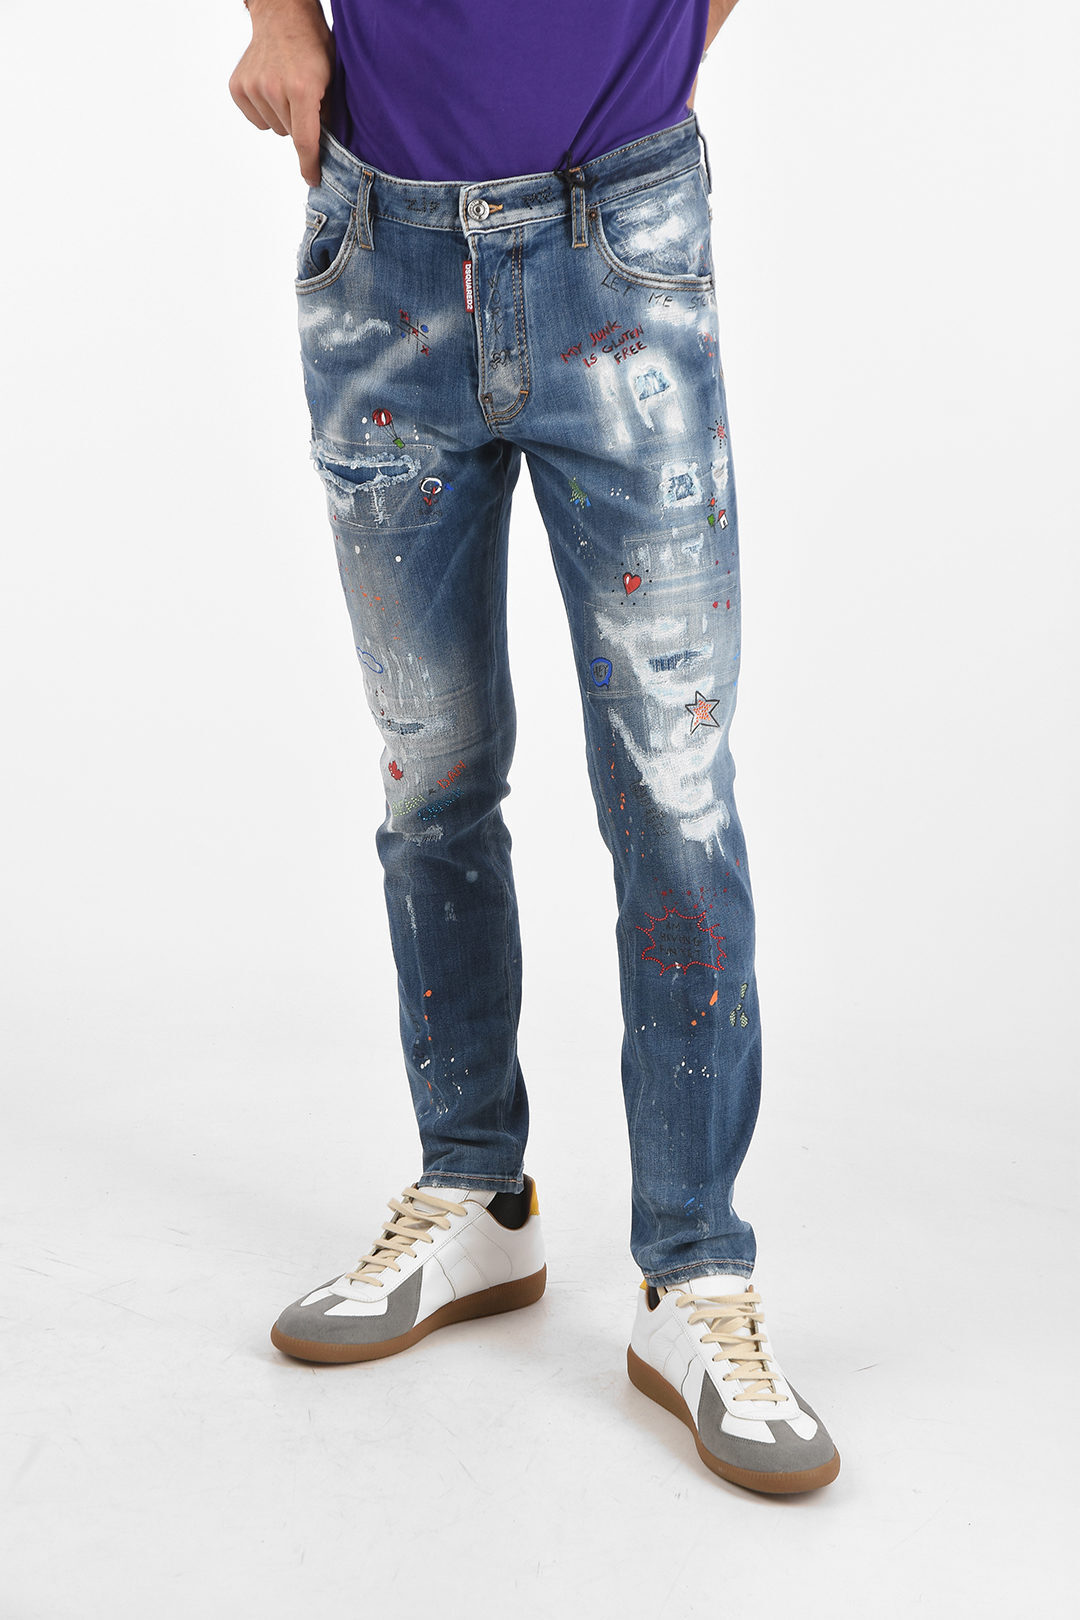 DSQUARED2 ディースクエアード Blue デニム S74LB0922 S30708 470 メンズ PRINTED SKATER STRETCH DENIMS WITH STRASS  dk